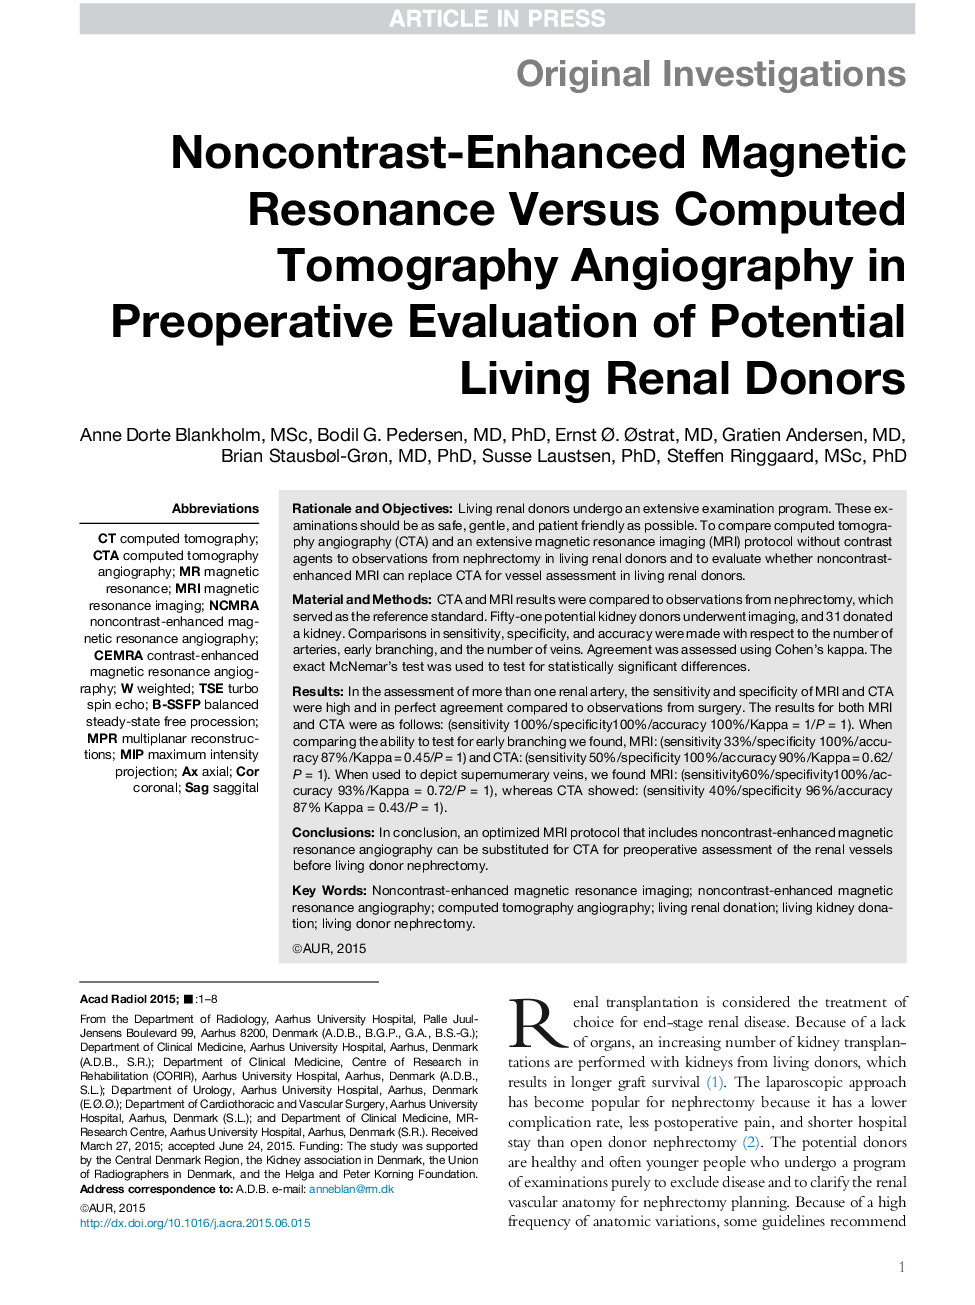 Noncontrast-Enhanced Magnetic Resonance Versus Computed Tomography Angiography in Preoperative Evaluation of Potential Living Renal Donors